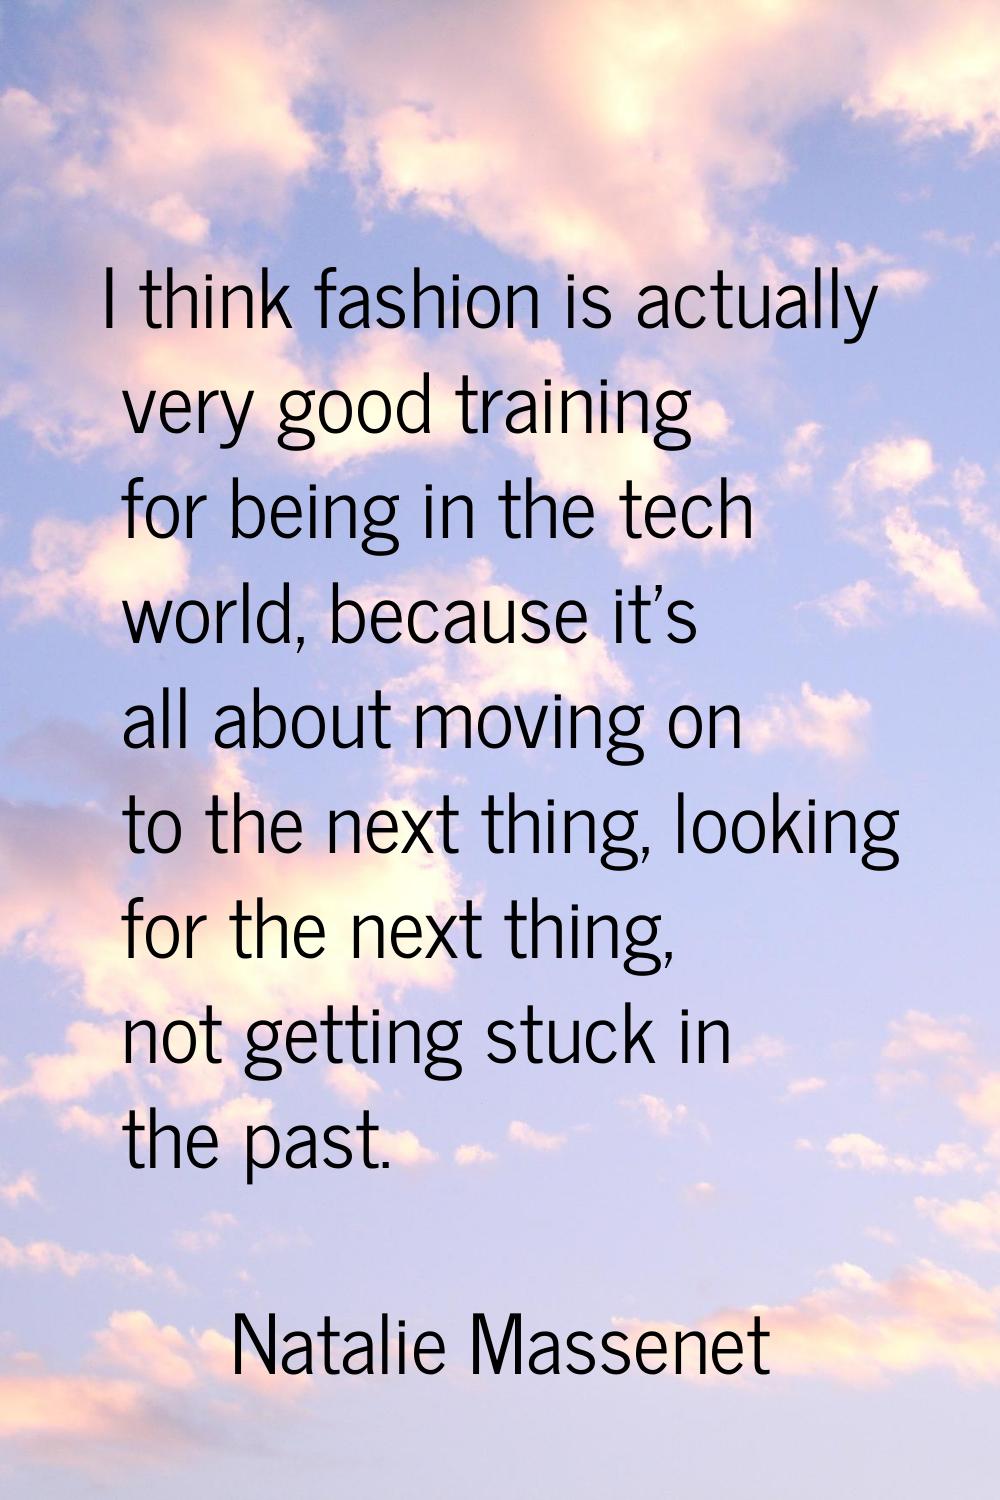 I think fashion is actually very good training for being in the tech world, because it's all about 